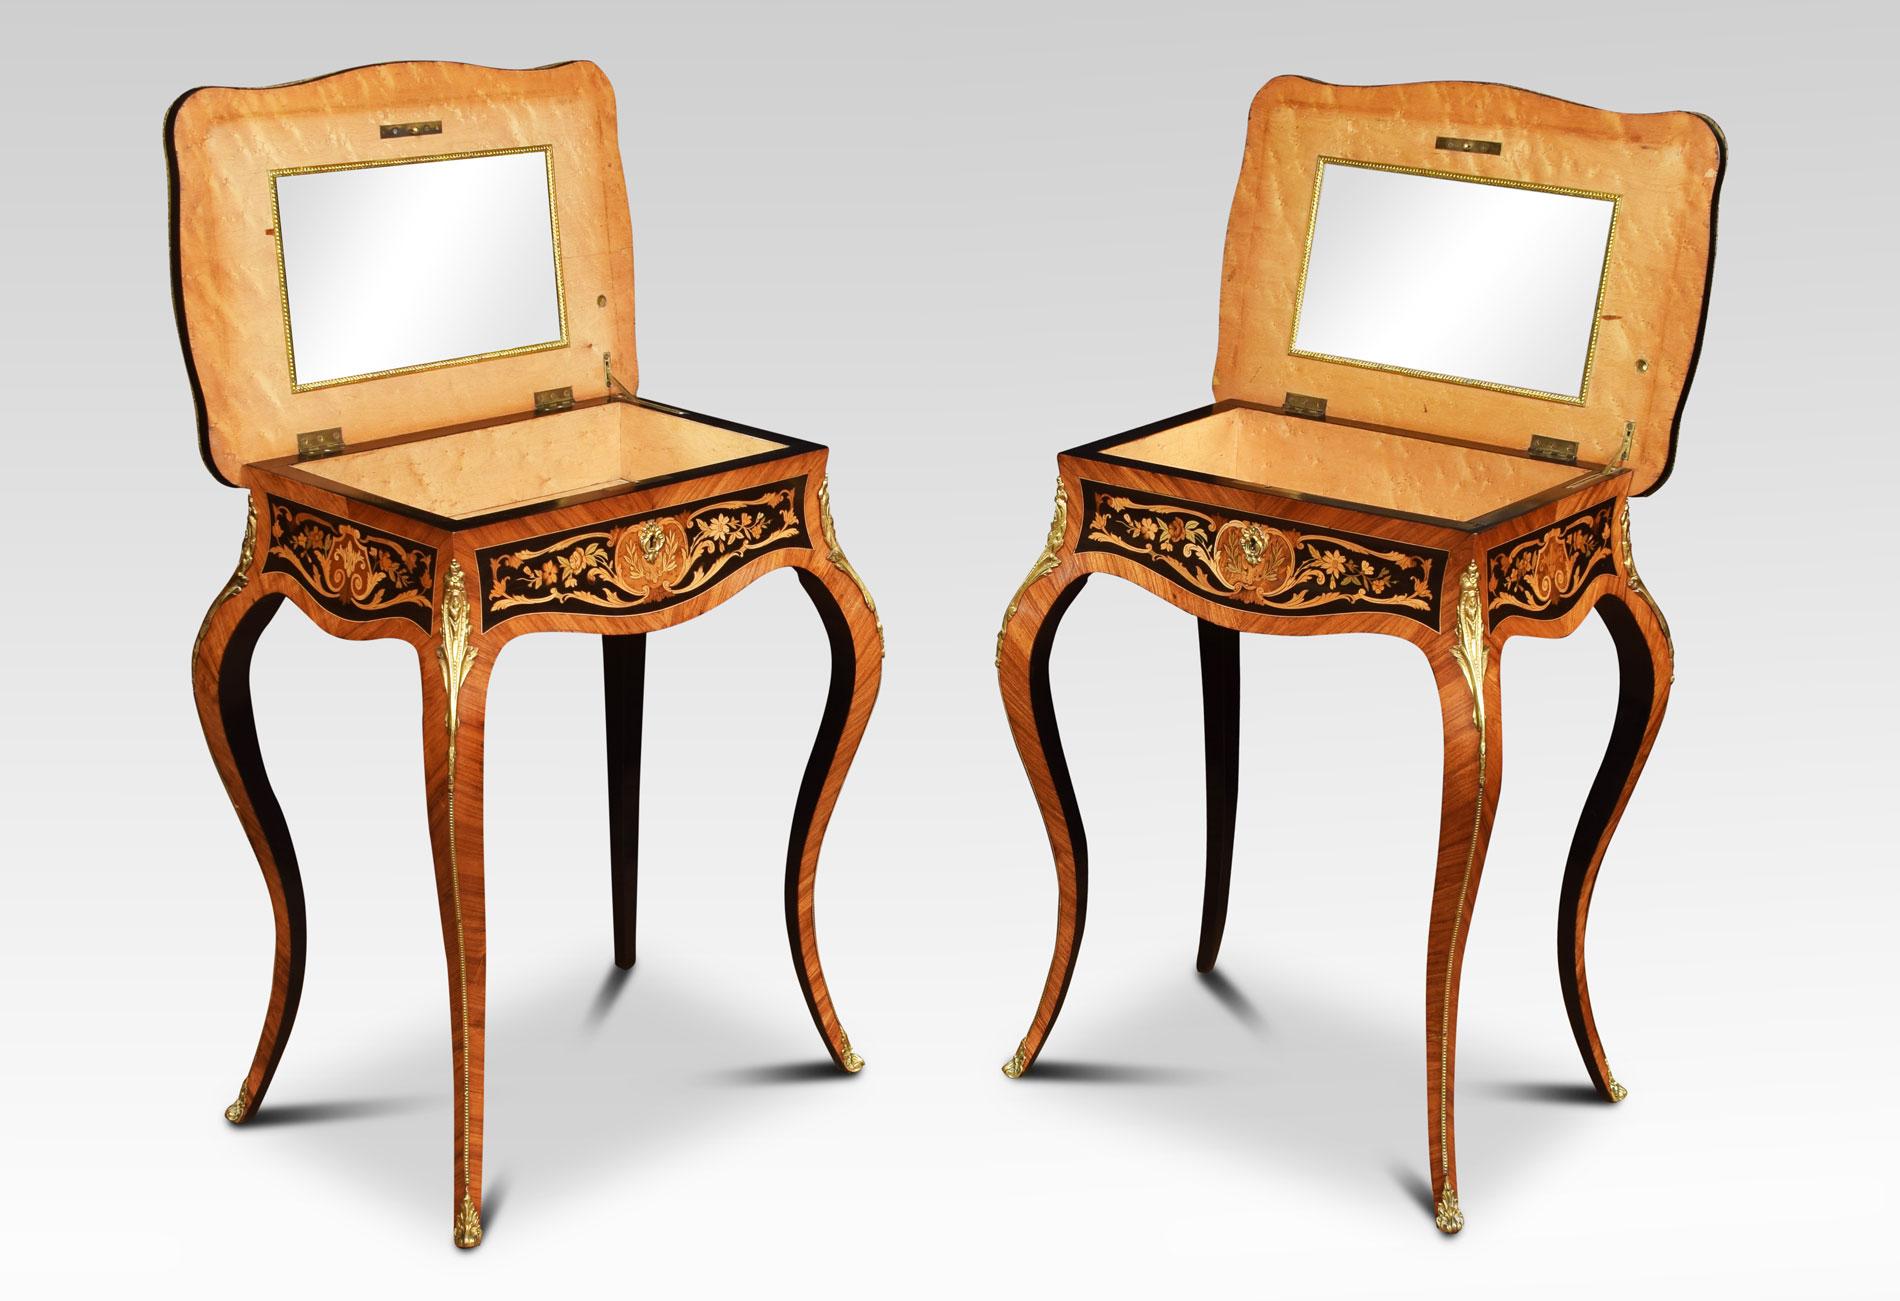 Pair of kingwood side tables the floral marquetry scrolling inlaid tops having brass rim enclosing storage compartment with mirrored lid all raised up on slender cabriole brass-mounted supports.
Dimensions:
Height 29.5 inches
Length 23.5